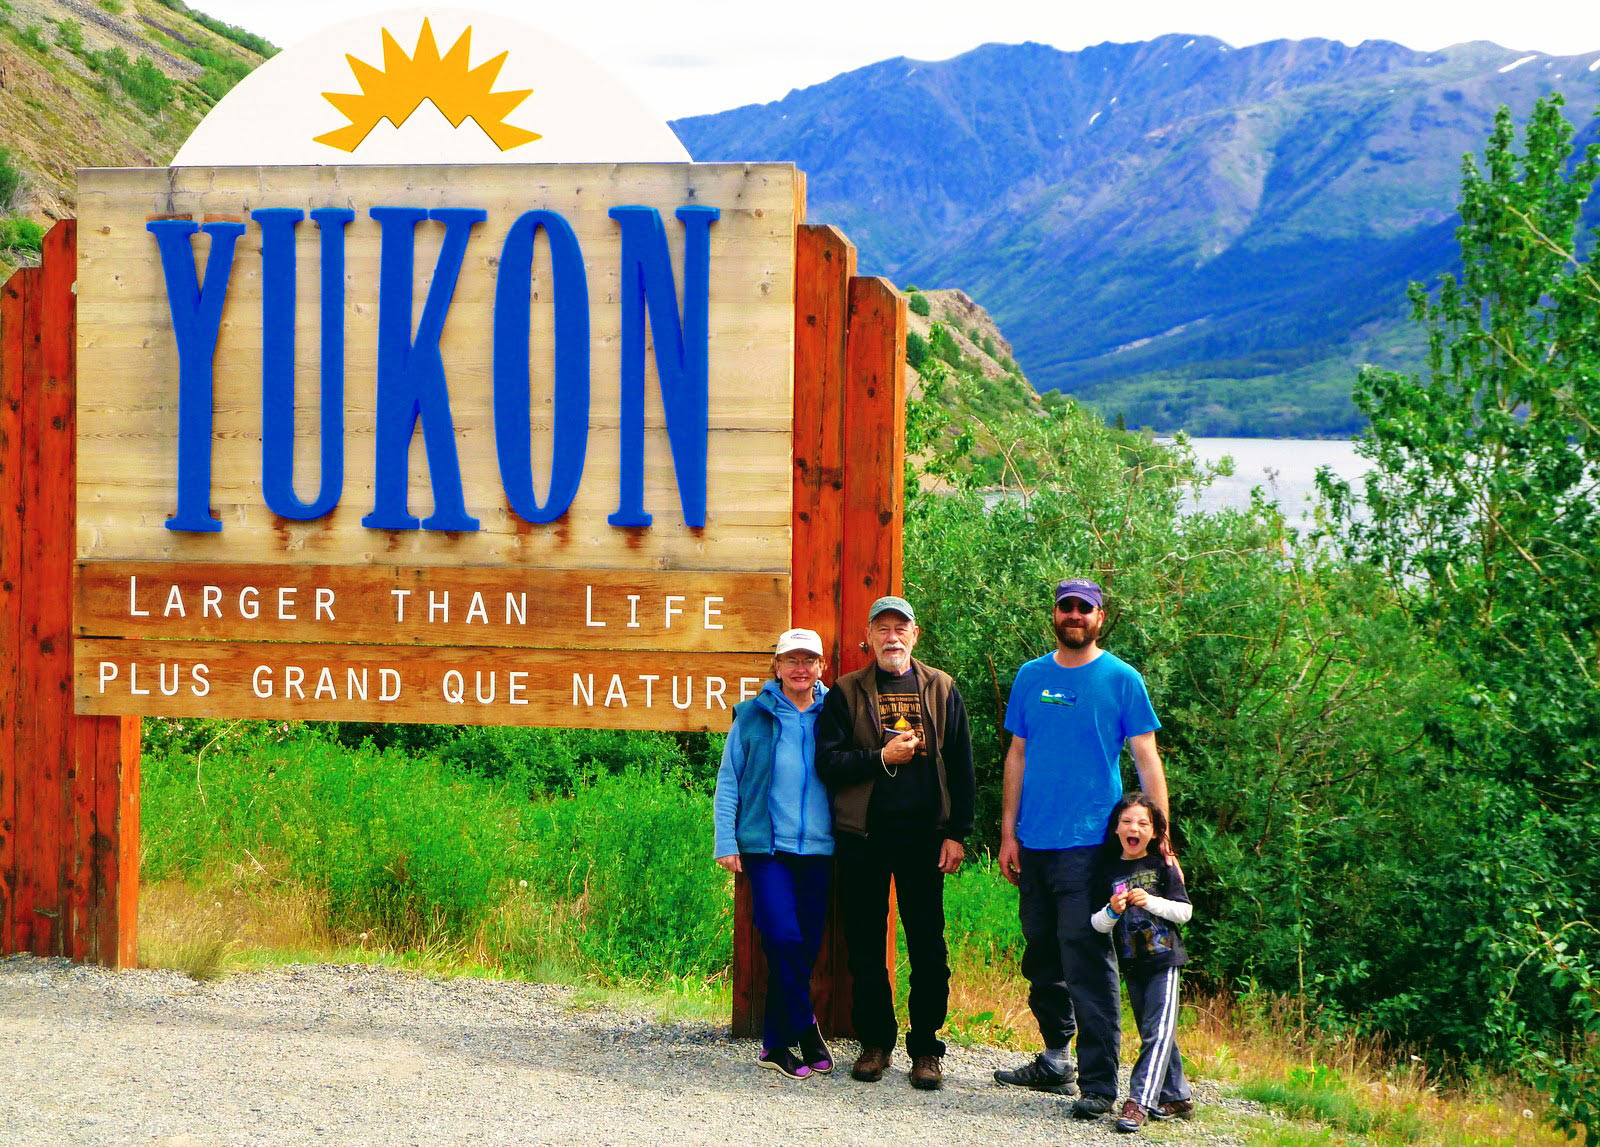 Welcome to the Yukon! A great photo opportunity at the sign on the Yukoner